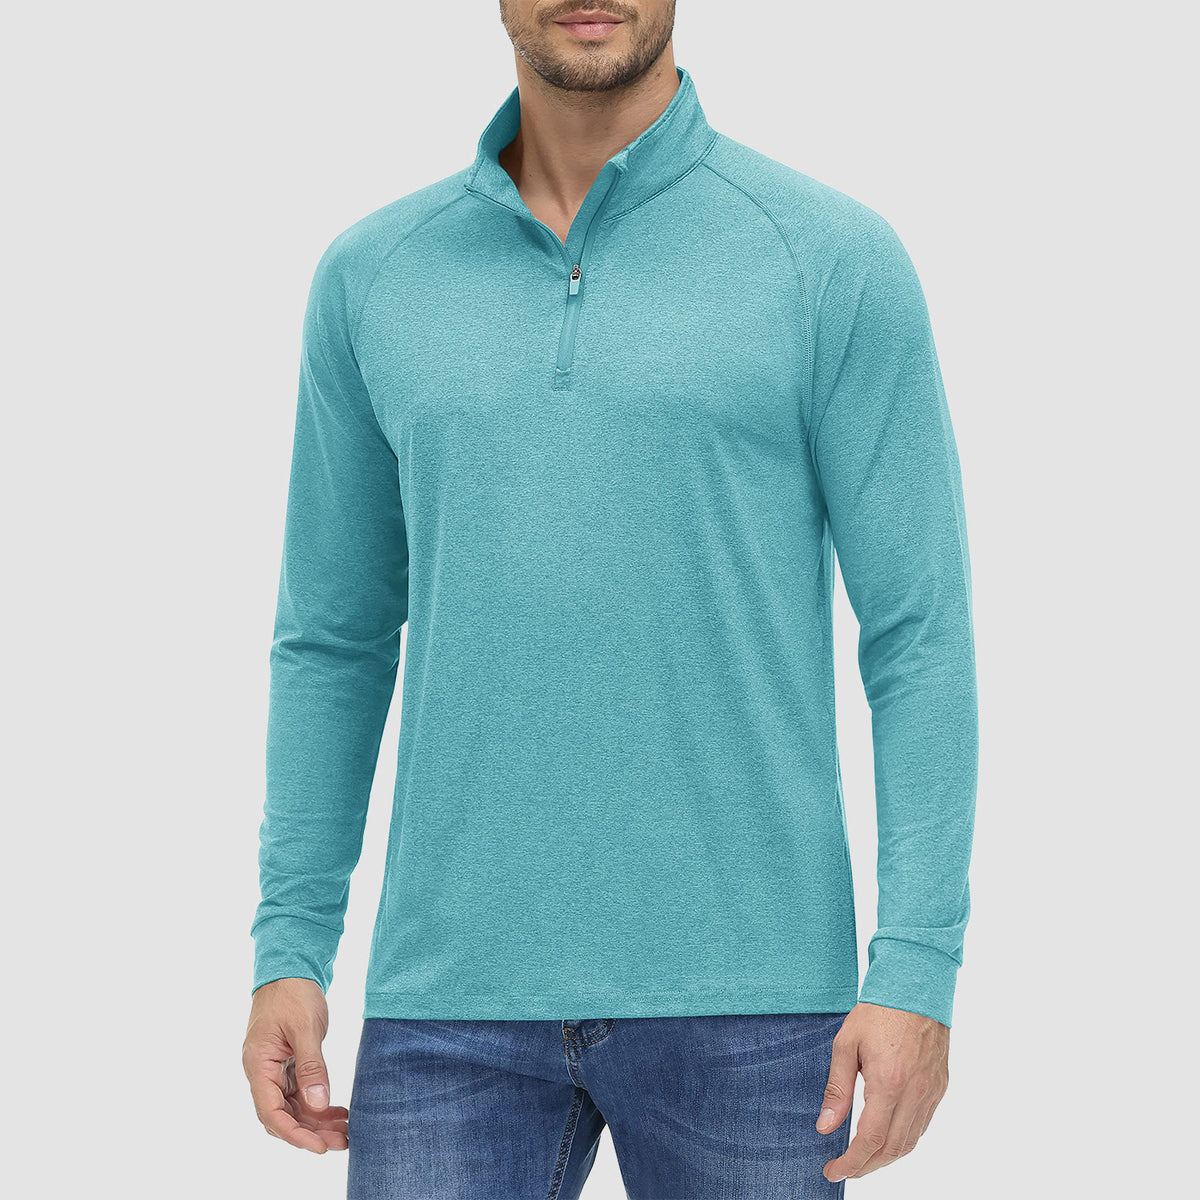 JWM Men's Long Sleeve Golf Polo Shirts - Athletic Casual Travel Performance  Collar Shirts Lightweight Quick Dry UPF50 : Buy Online at Best Price in KSA  - Souq is now : Fashion